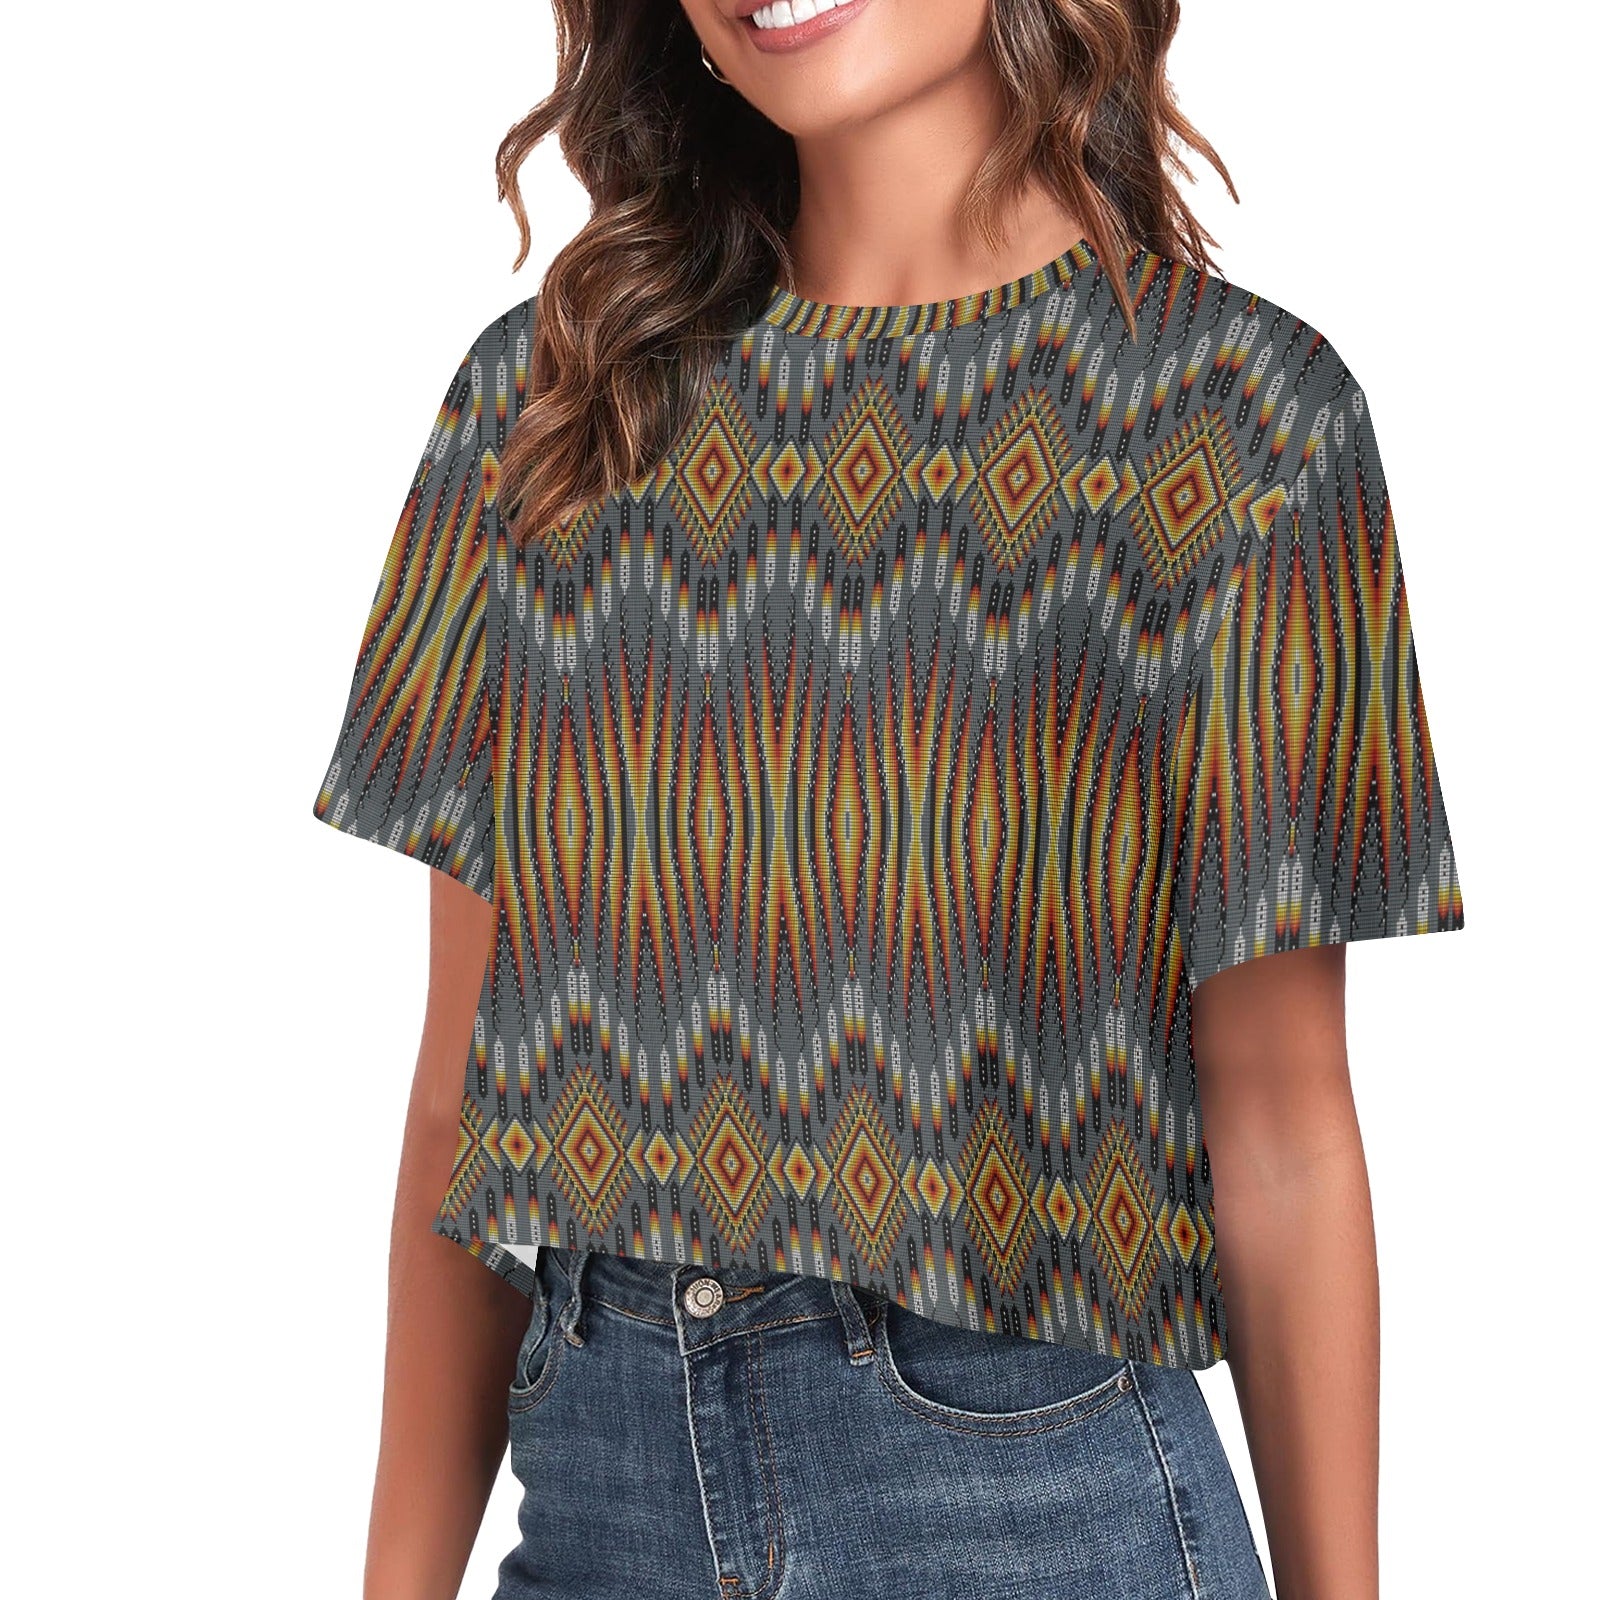 Fire Feather Grey Women's Cropped T-shirt